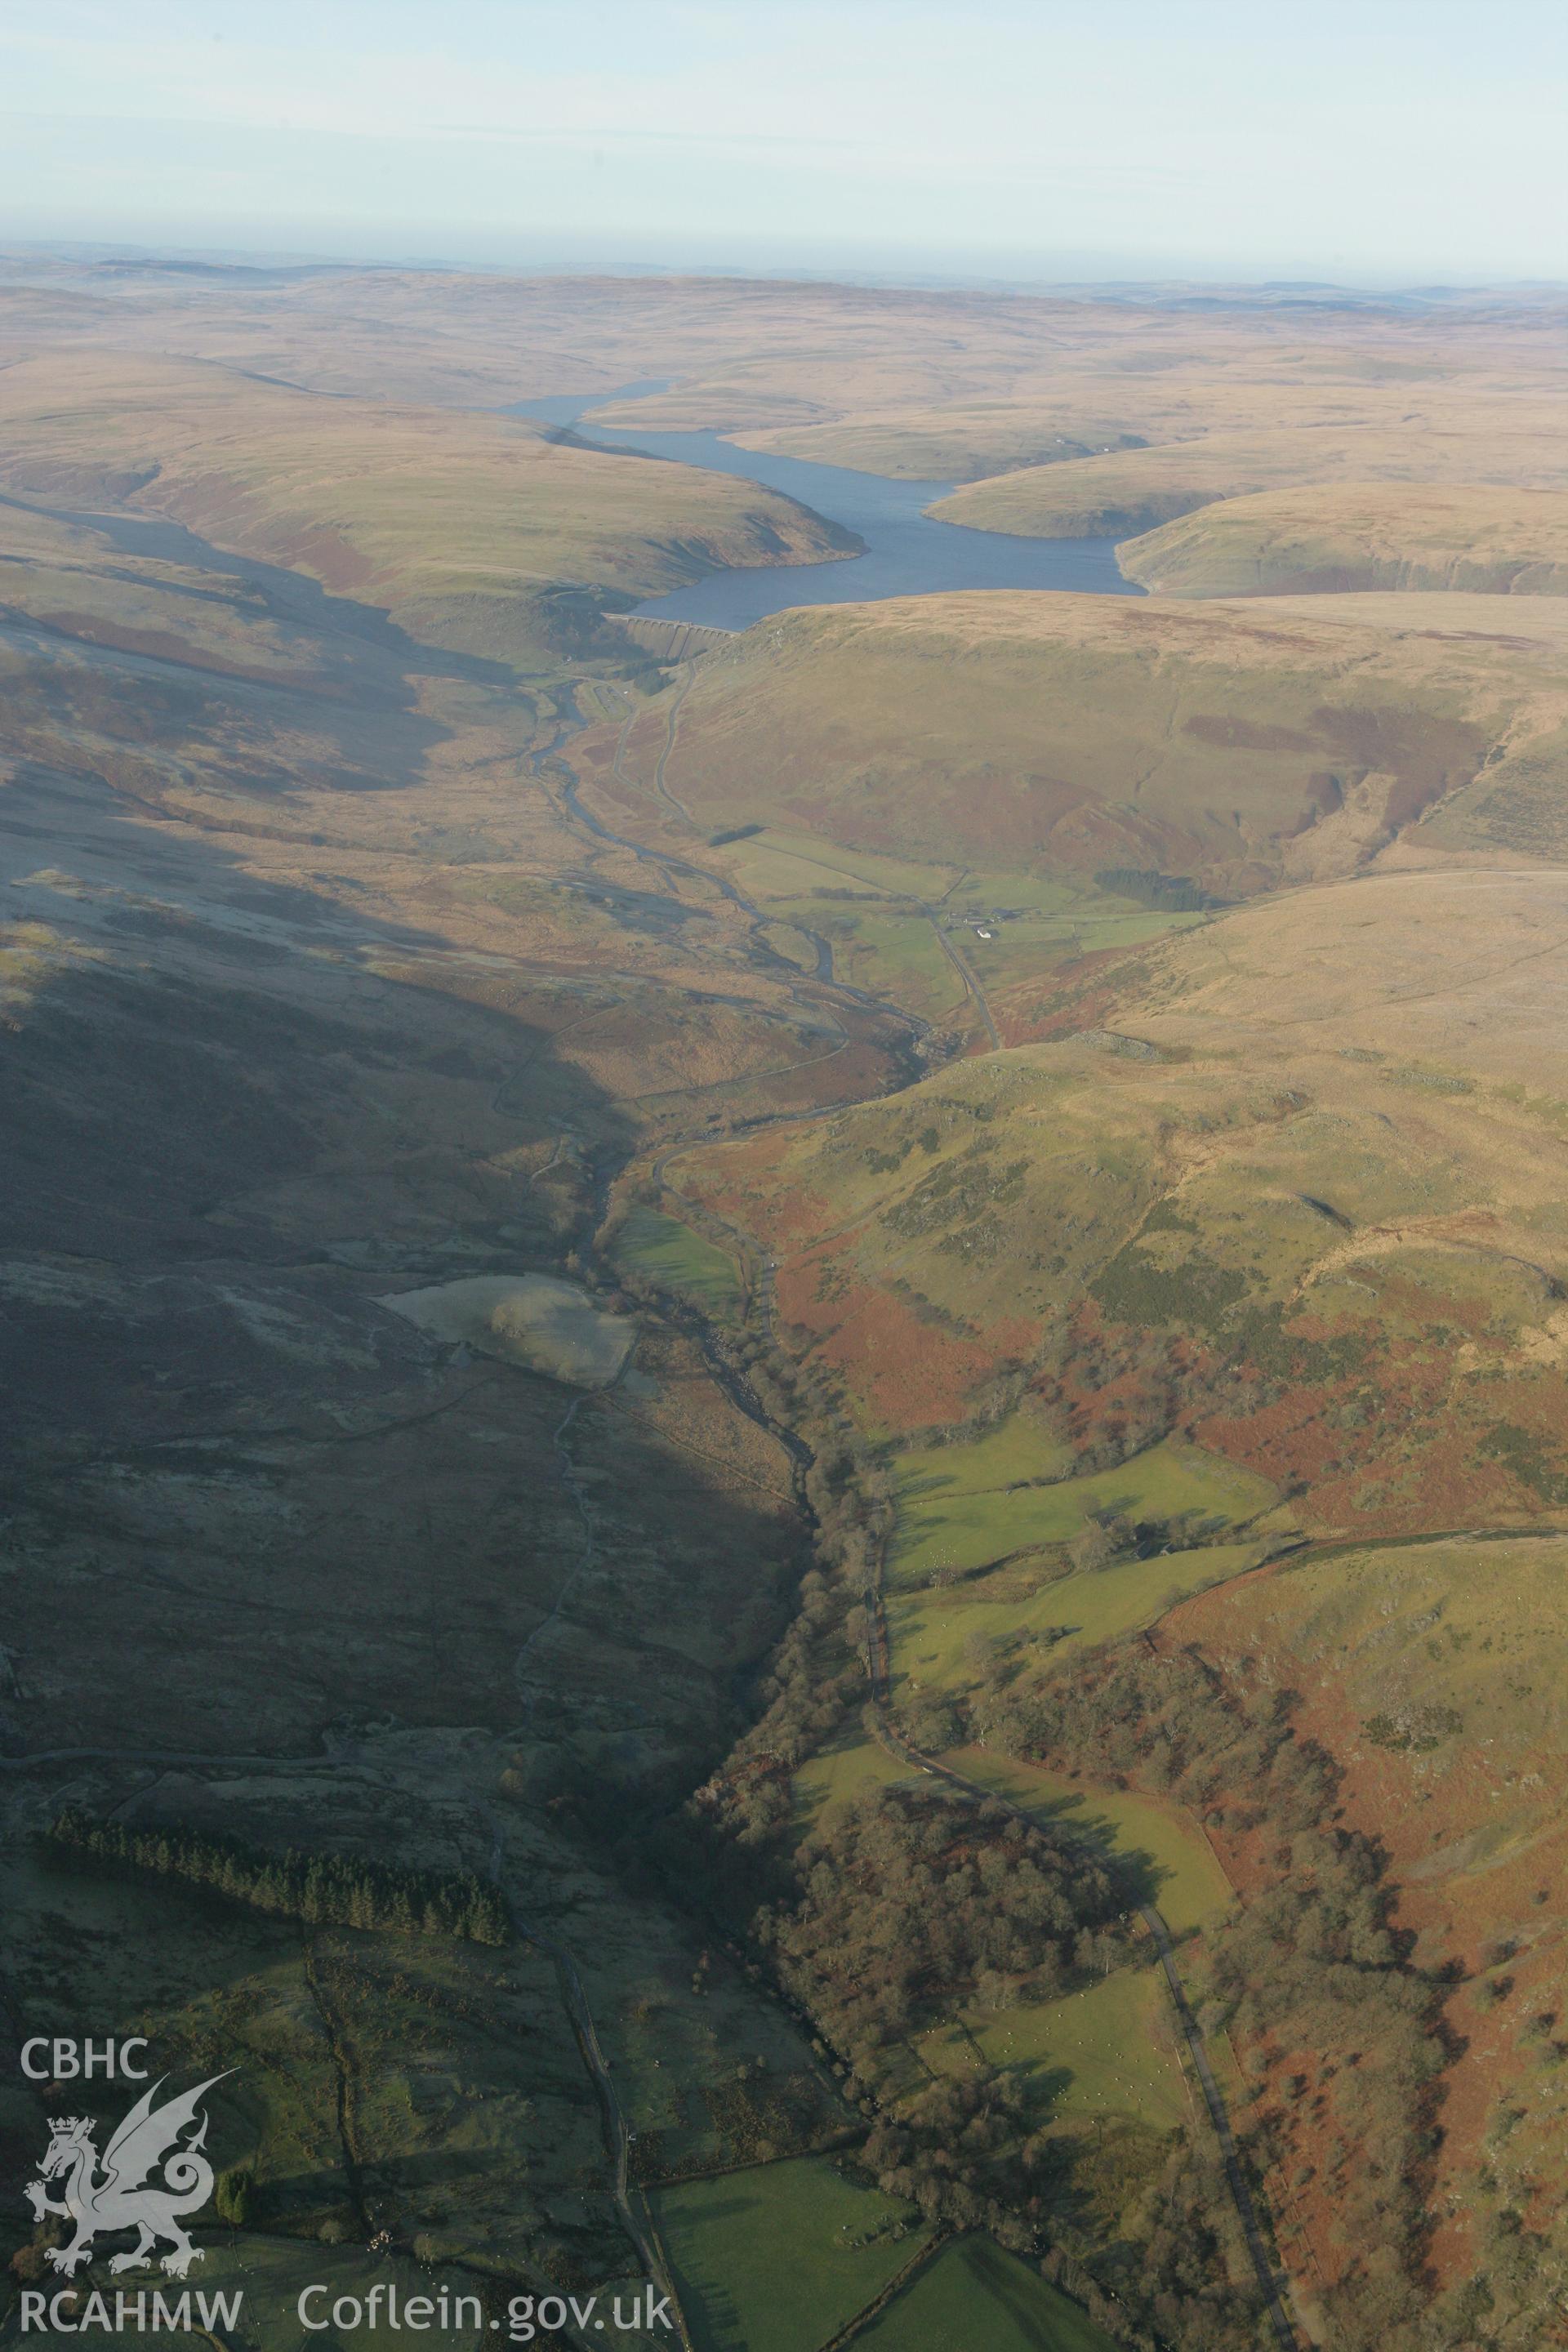 RCAHMW colour oblique photograph of landscape looking north-west towards Claerwen dam. Taken by Toby Driver on 20/12/2007.